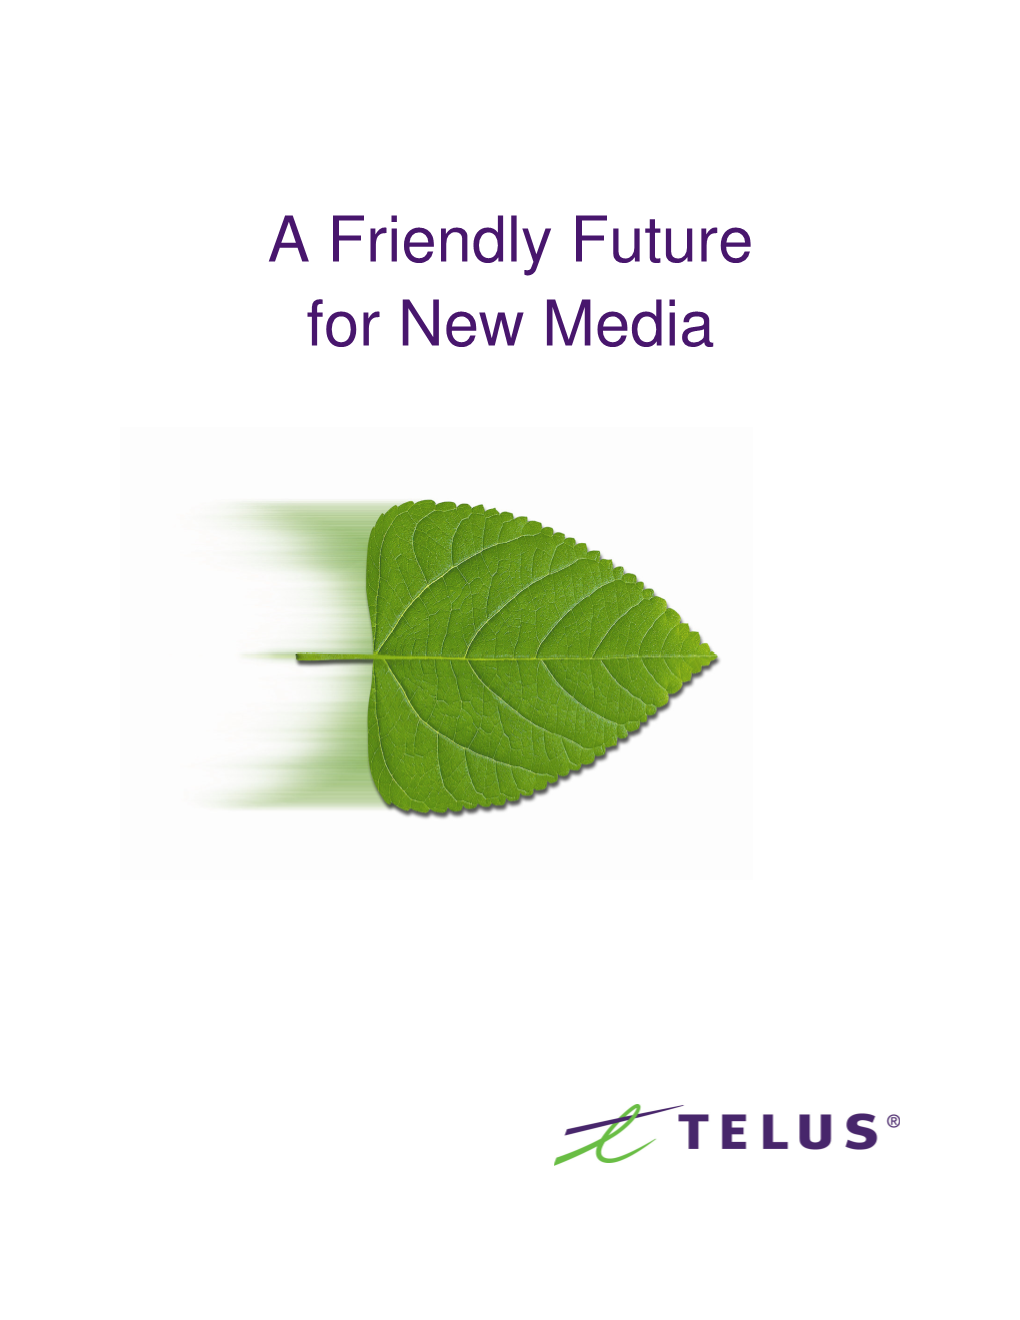 A Friendly Future for New Media